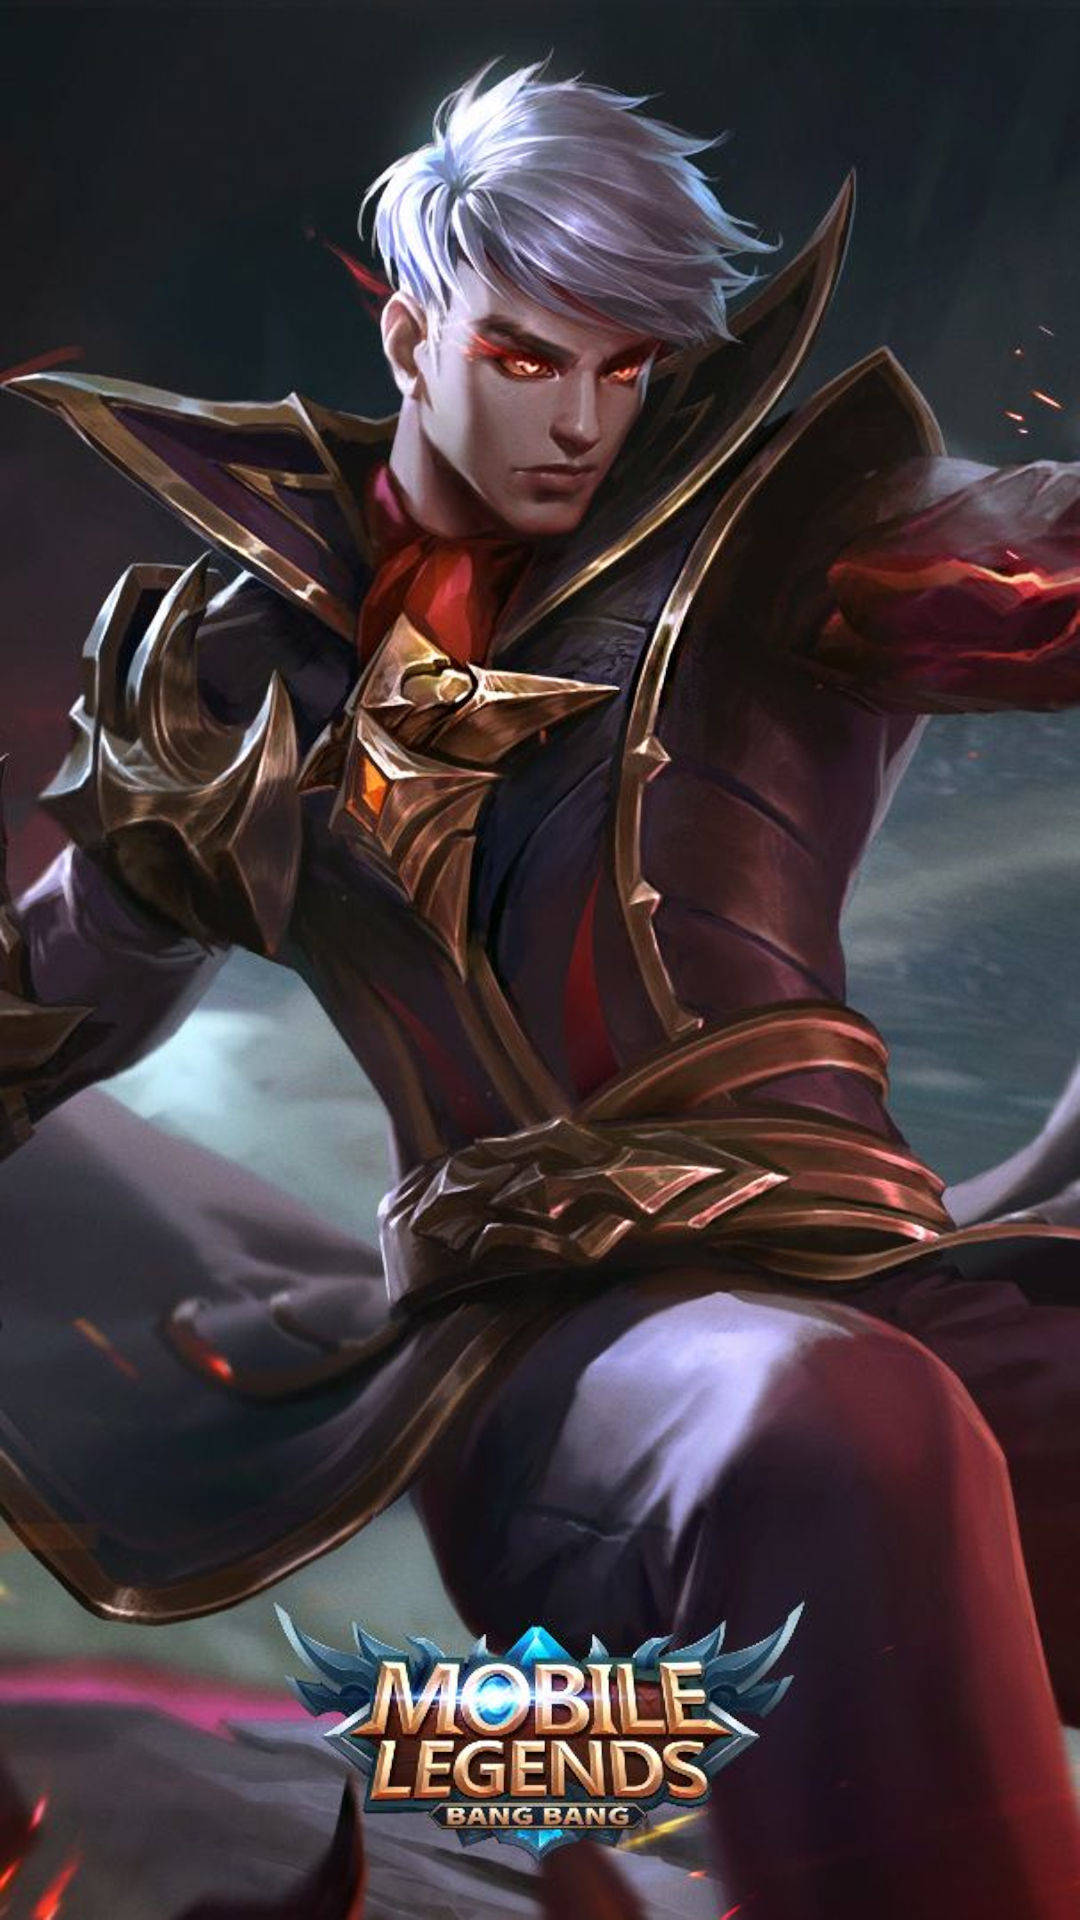 Caped Alucard With Mobile Legends Logo Wallpaper